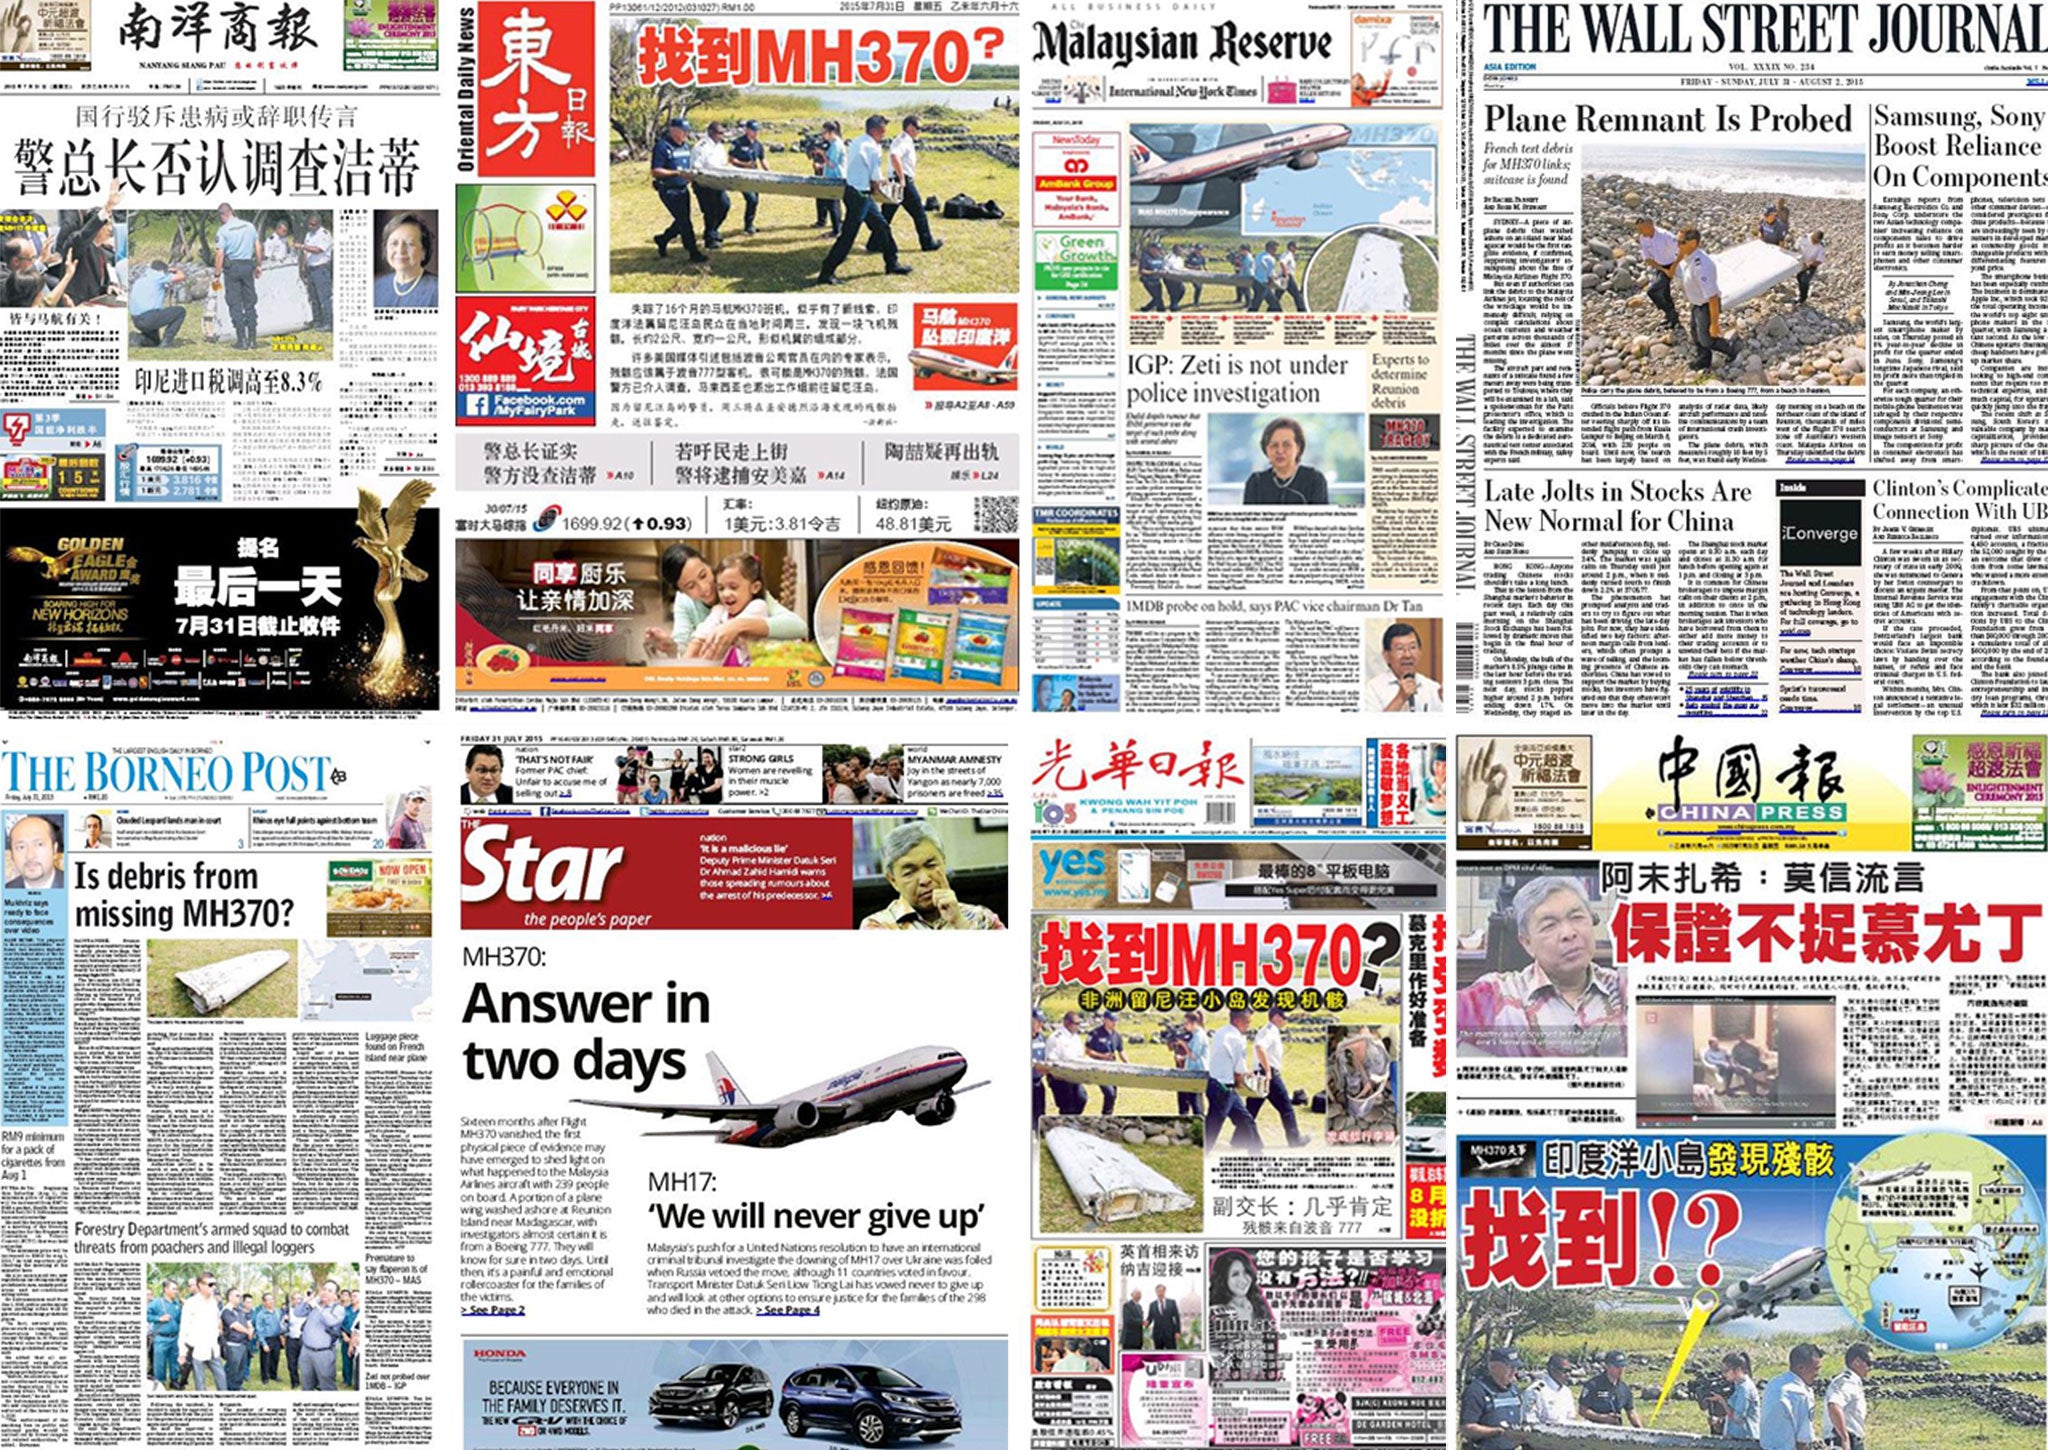 News of the possible MH370 debris dominated Malaysian newspapers on 31 July